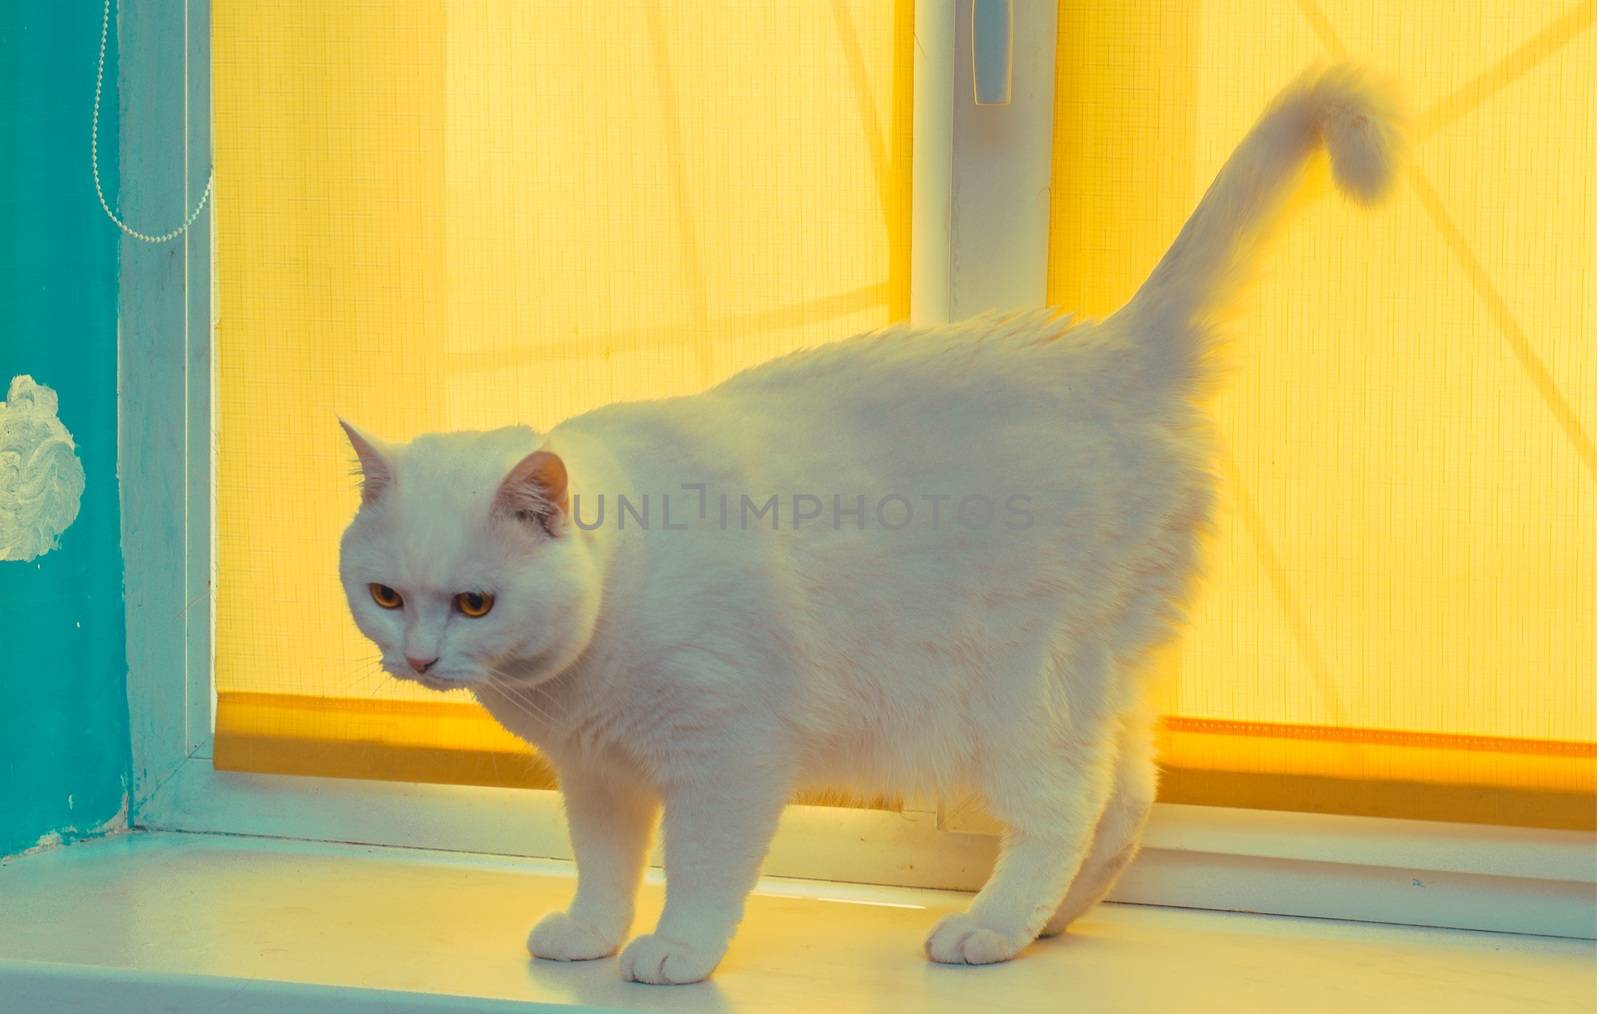 Great white cat in the yellow window by chernobrovin